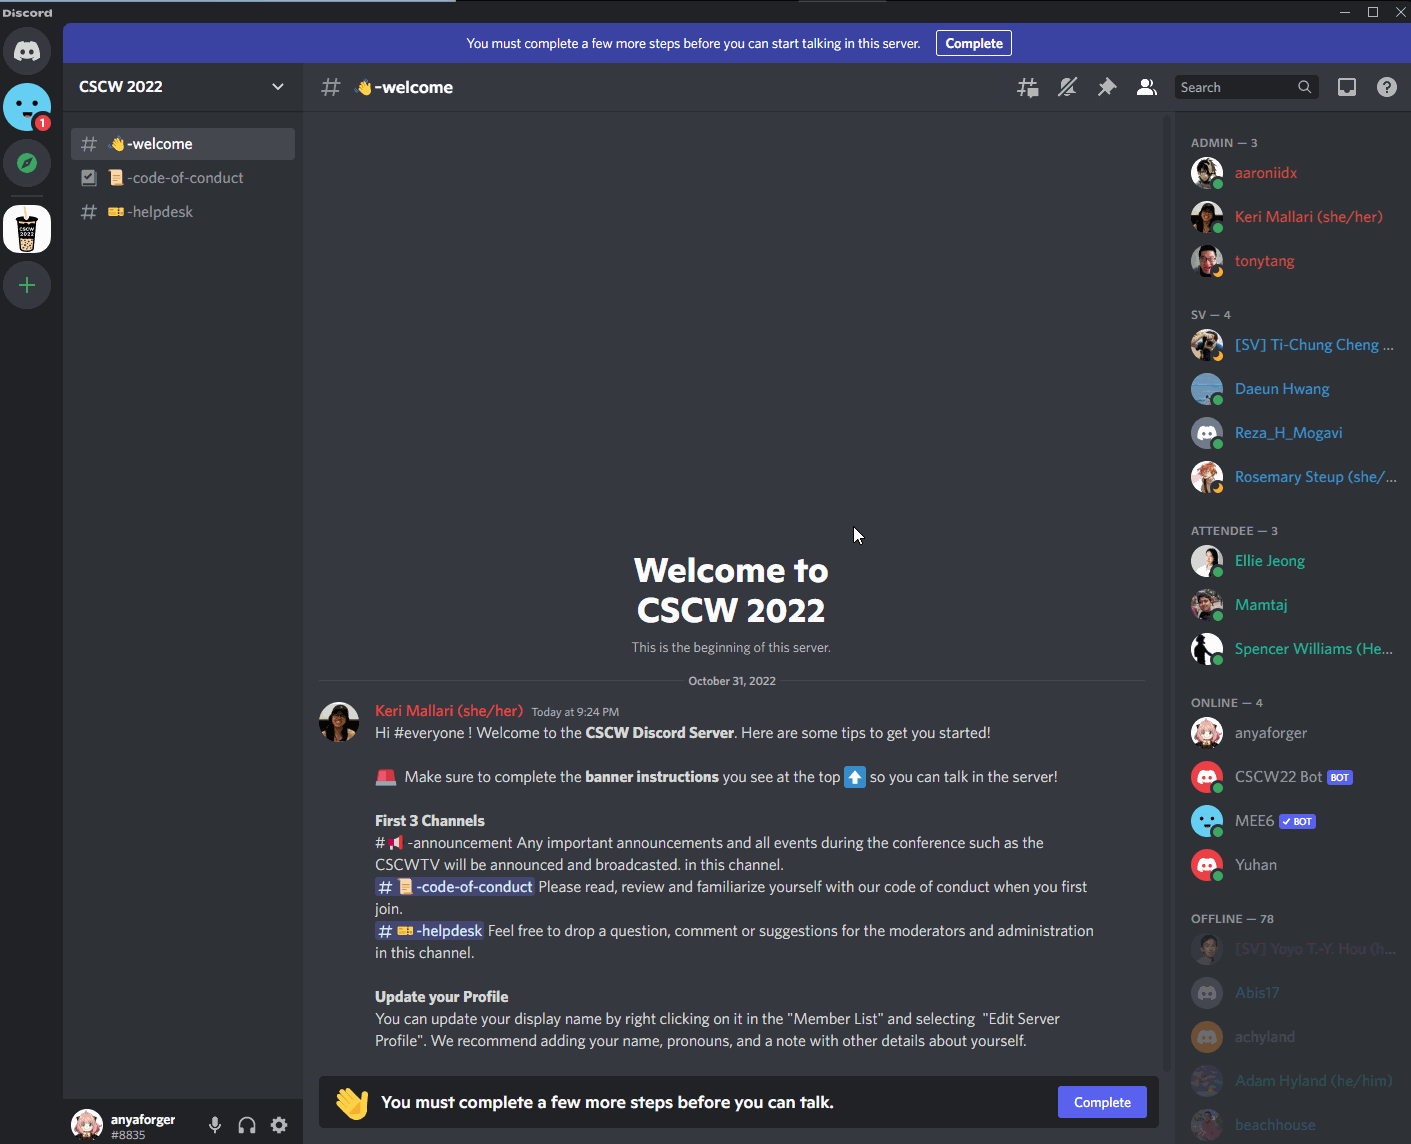 make you a professional discord server within 48 hours